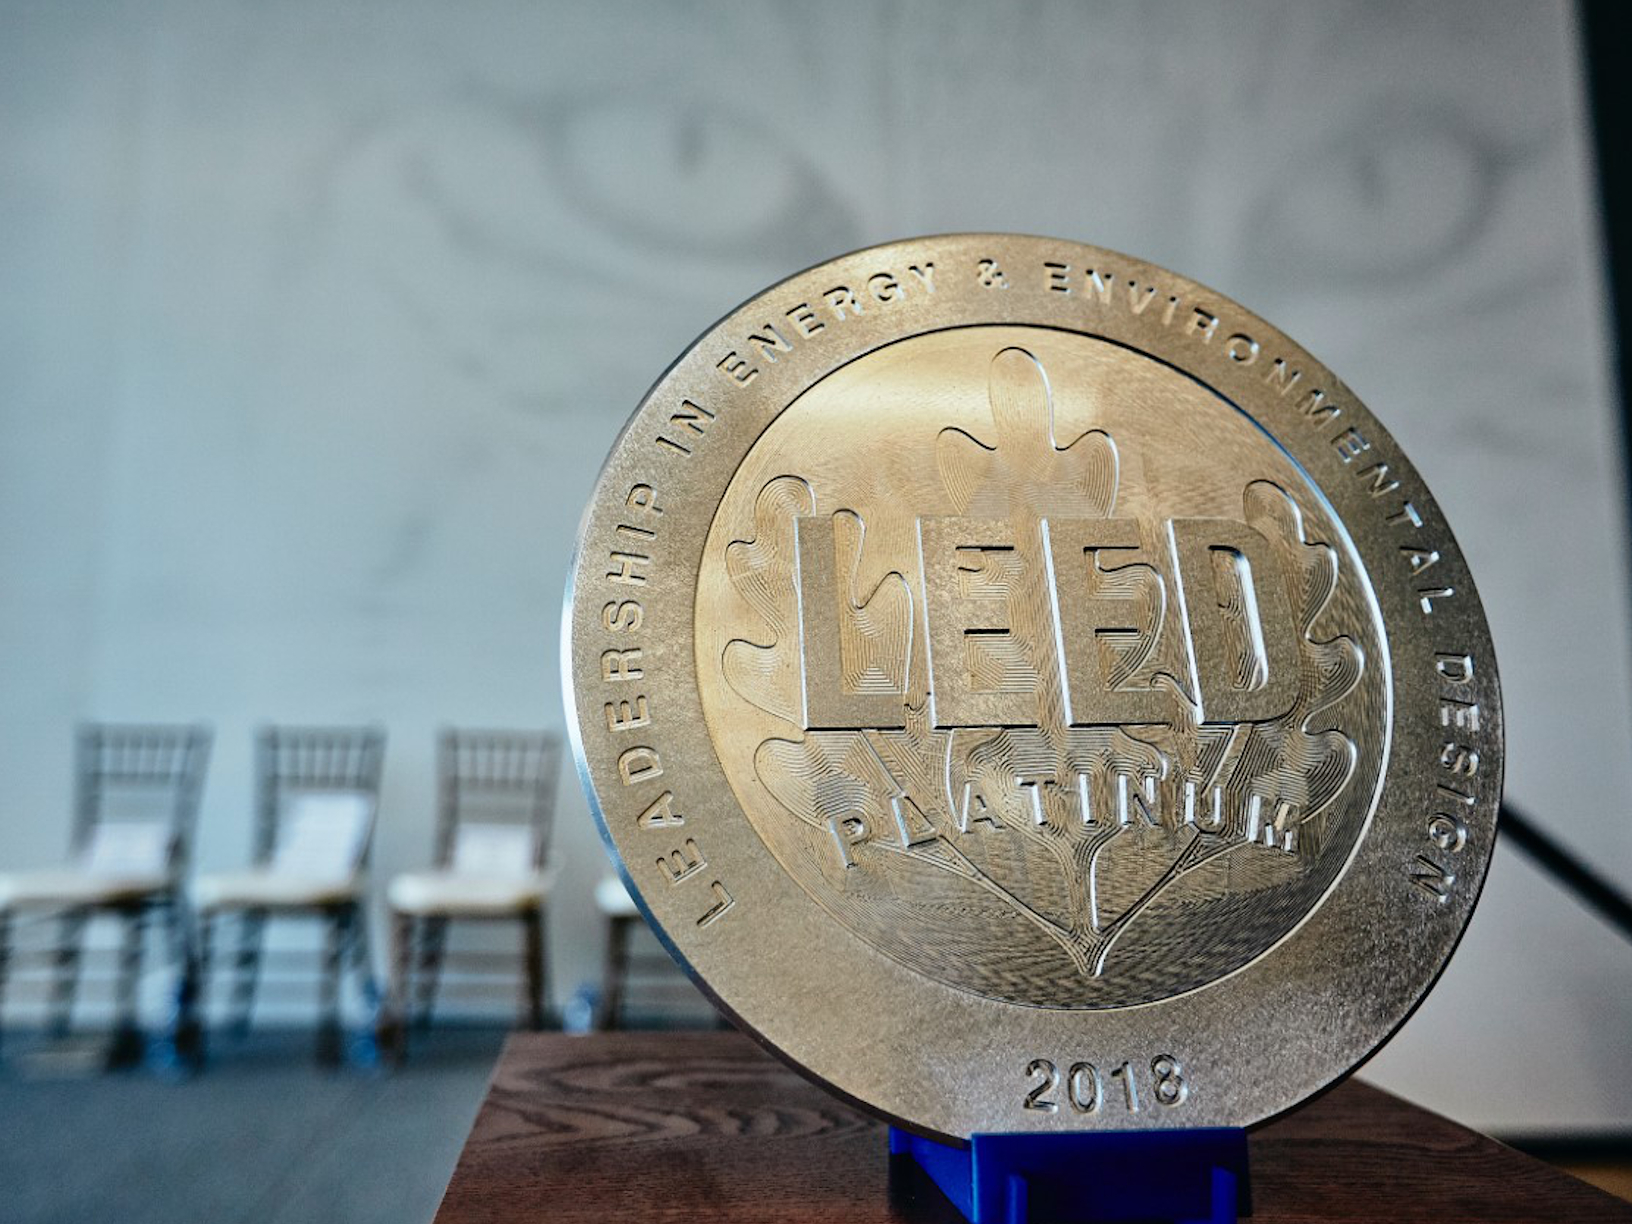 A LEED medallion sitting on a table